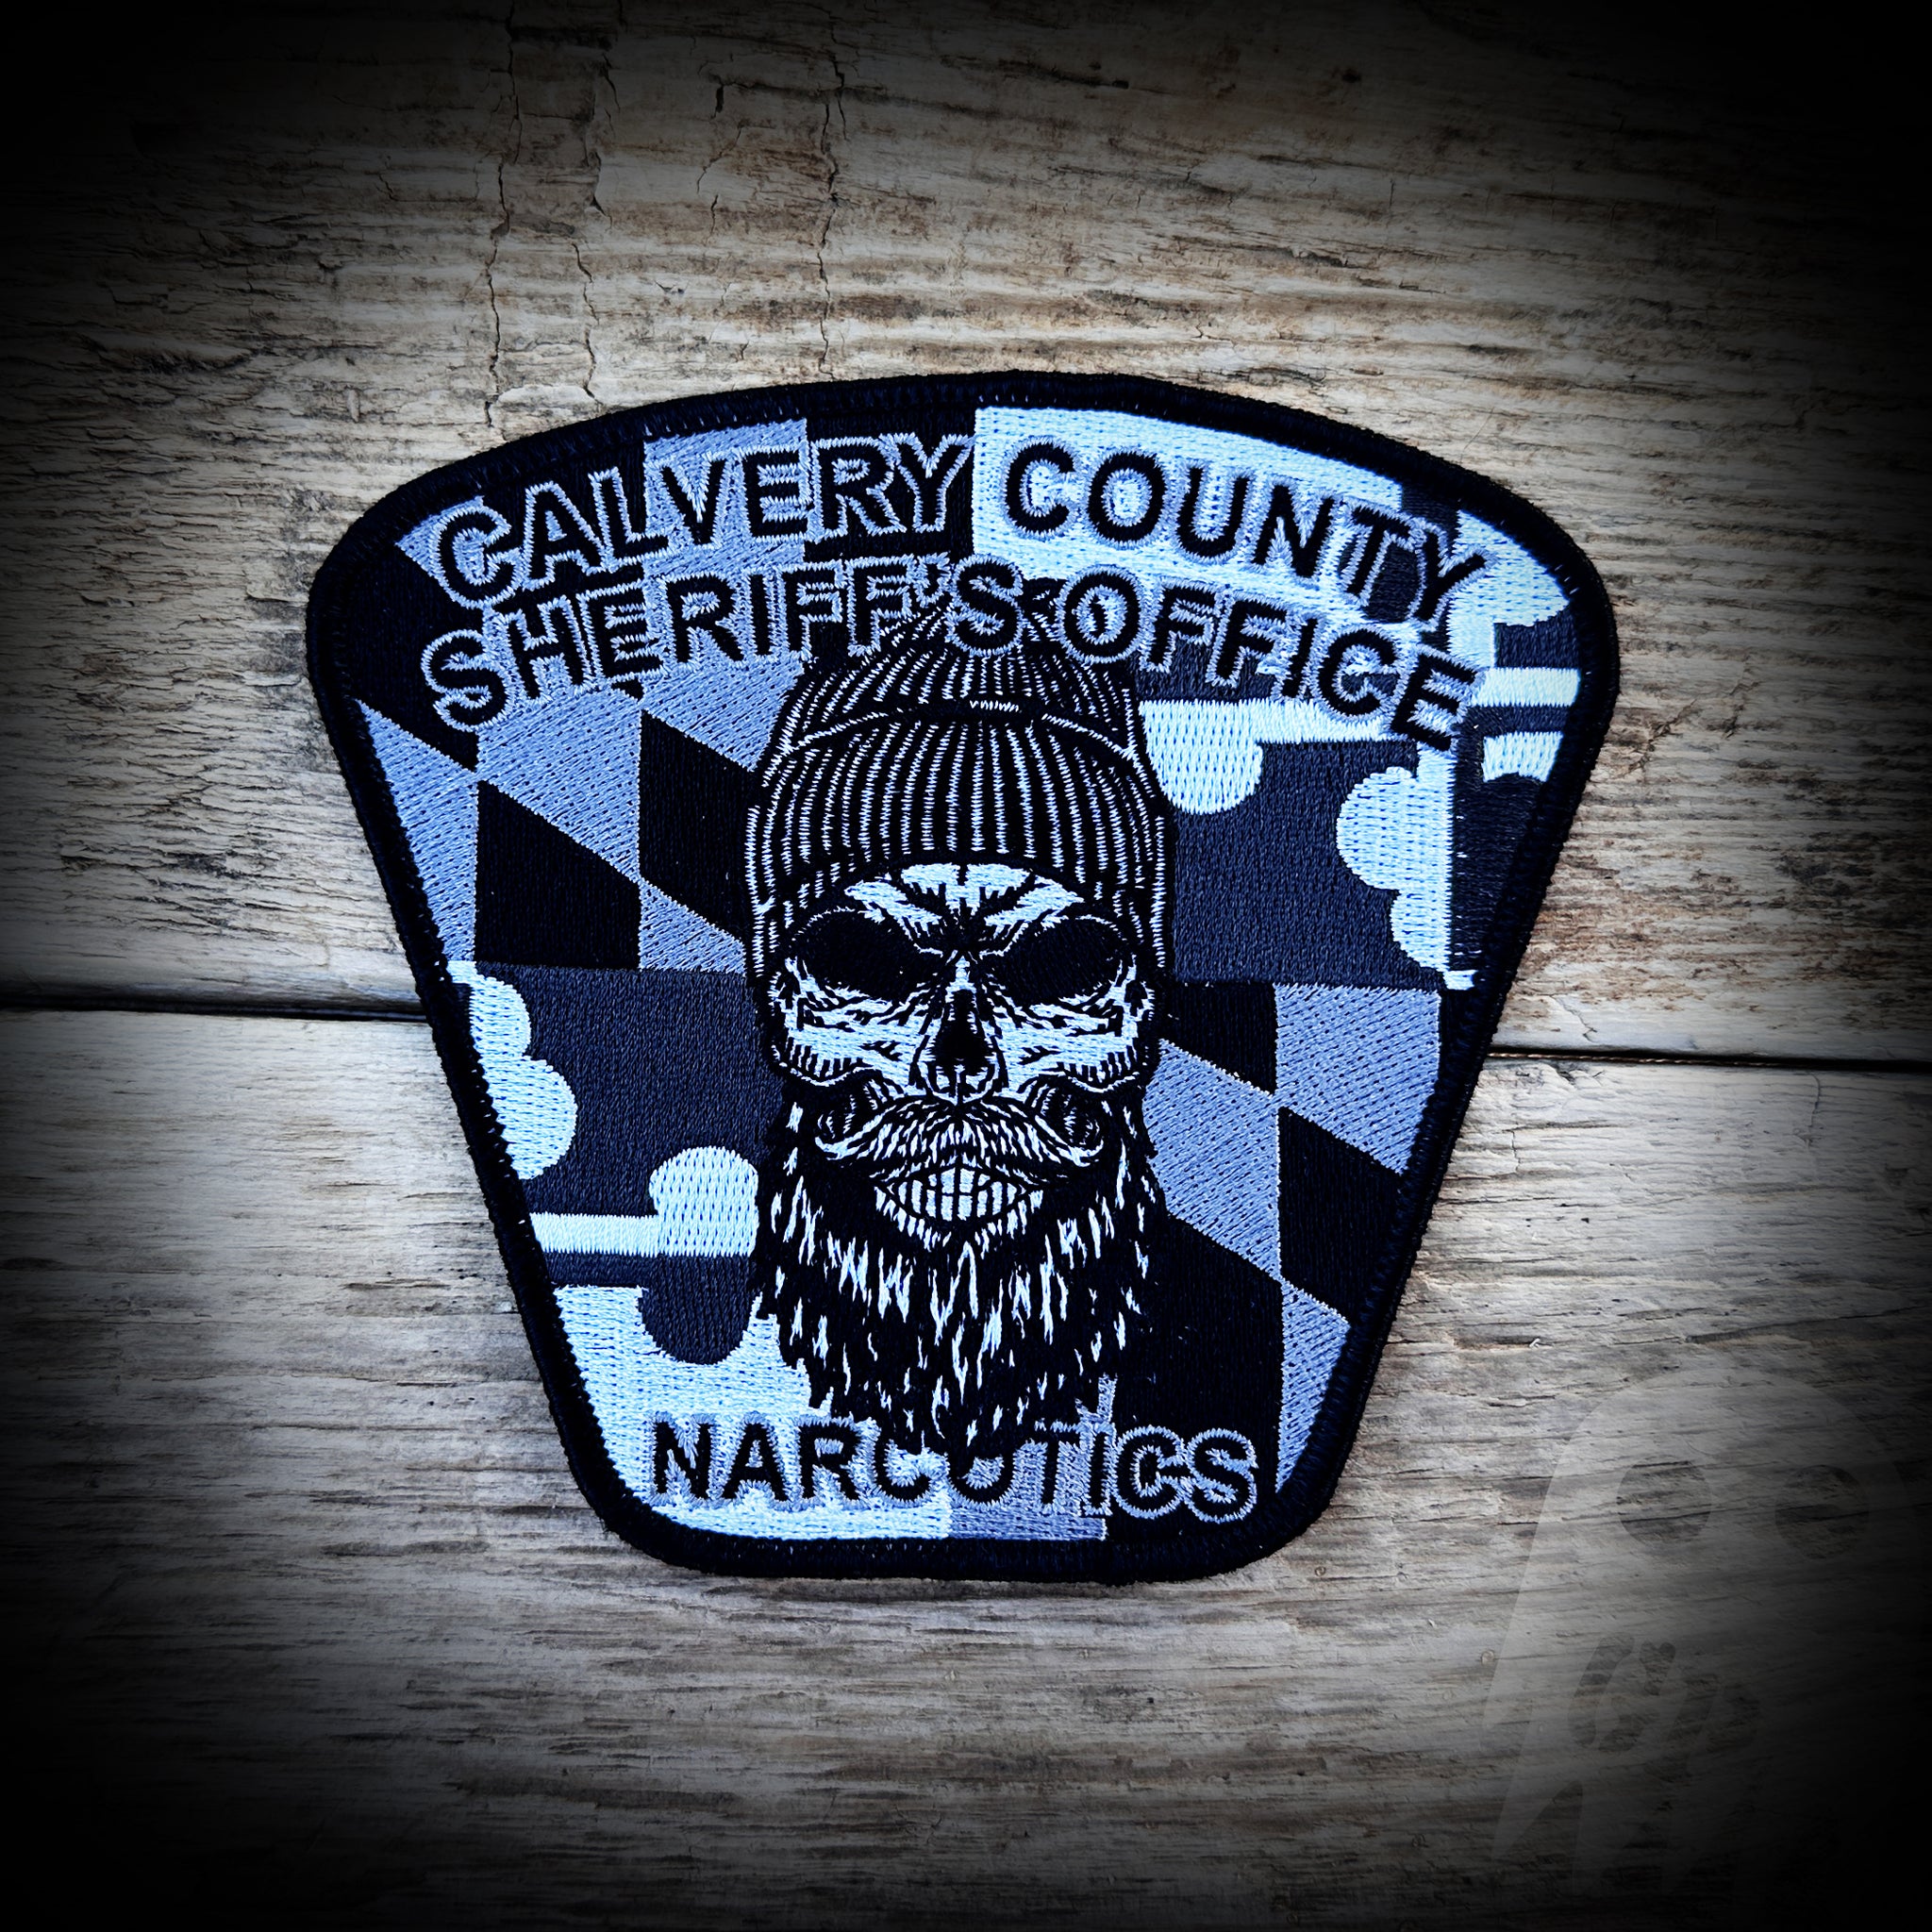 Calvery County Sheriff's Office - Narcotics - Misfit Patch